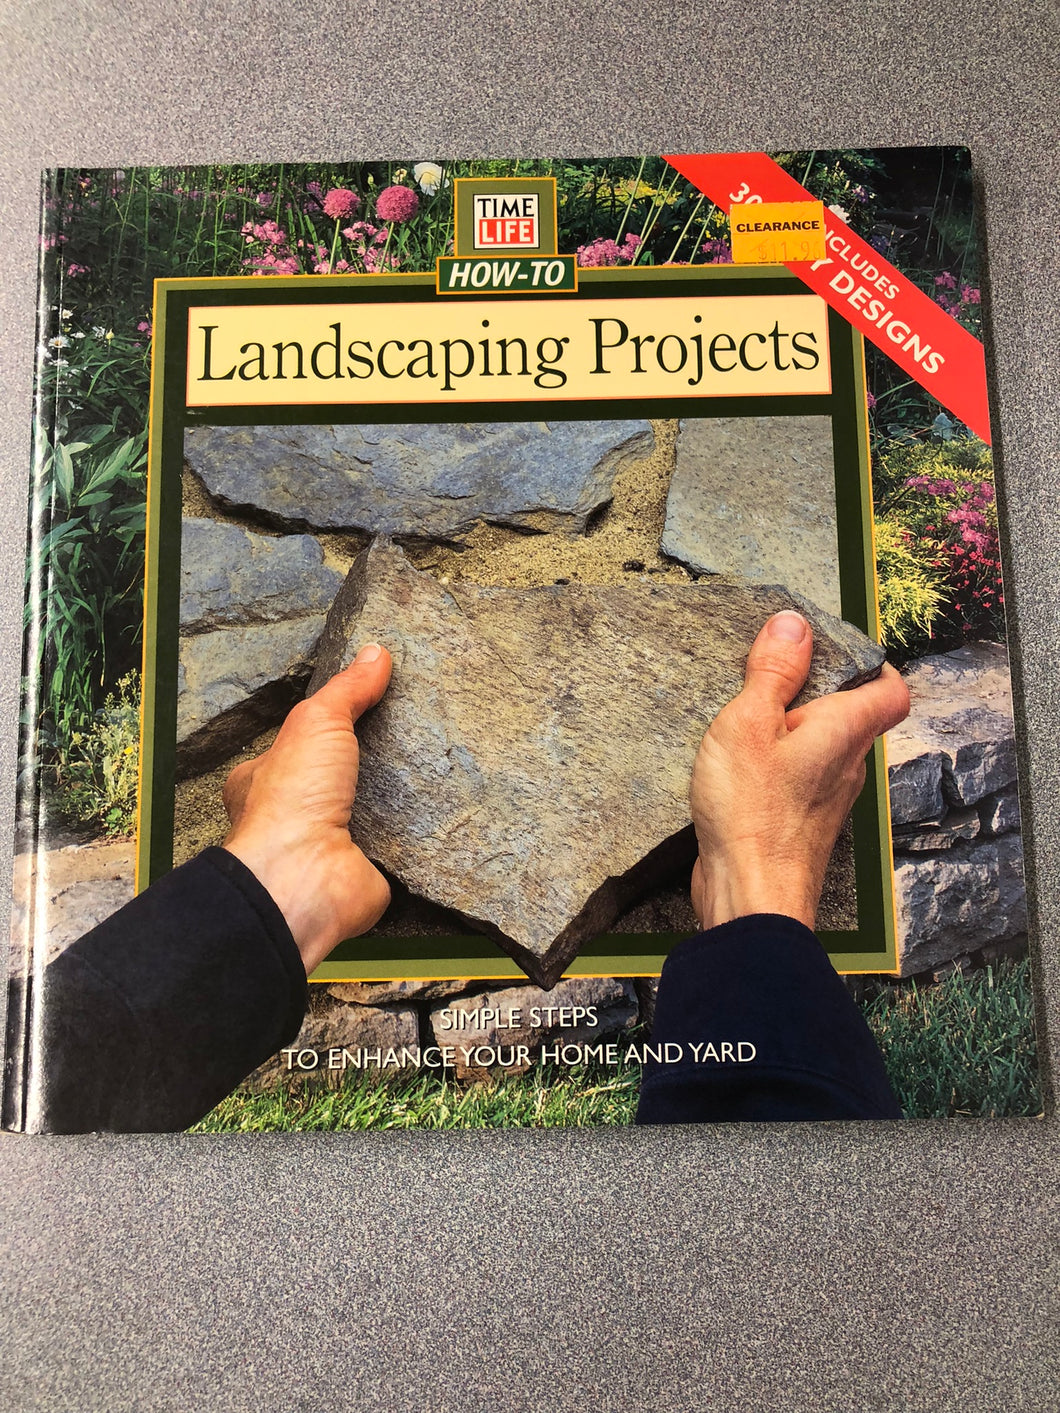 Time-Life How-To Landscaping Projects: Simple Steps to Enhance Your Home and Yard, [1997] G 8/22